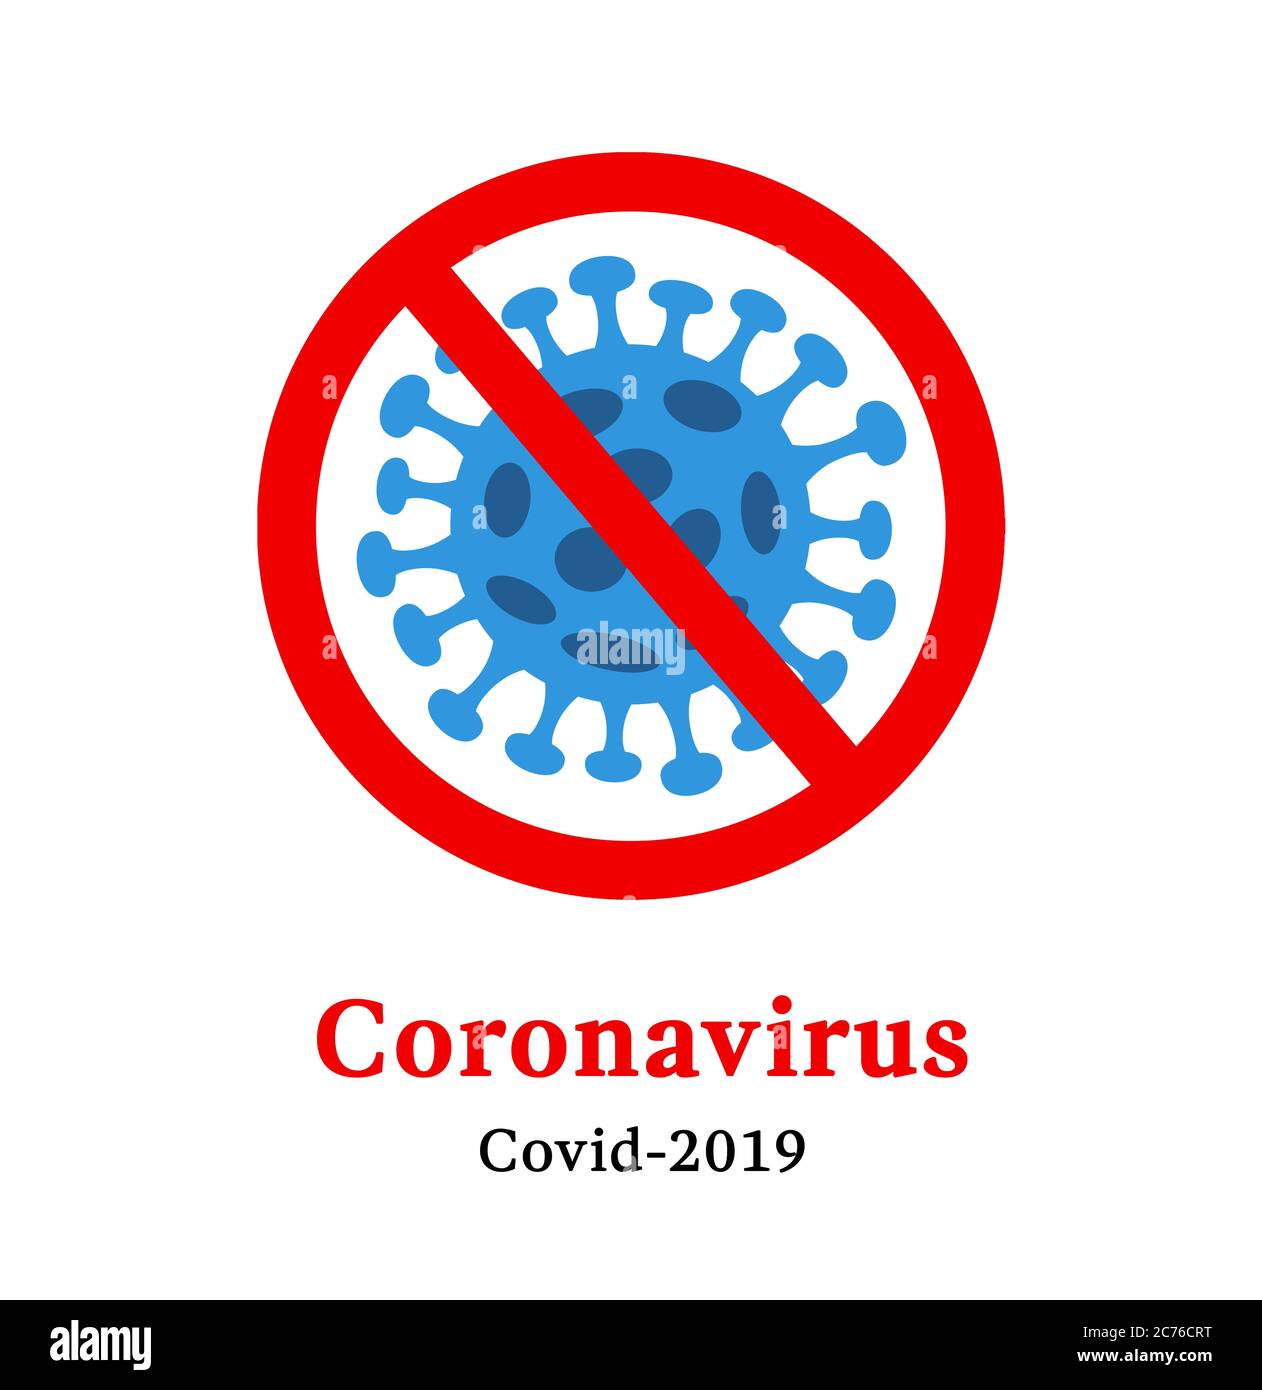 Abstract virus strain model Novel coronavirus 2019-nCoV is crossed out with red STOP sign. The danger of coronavirus and the risk to public health. Pa Stock Photo